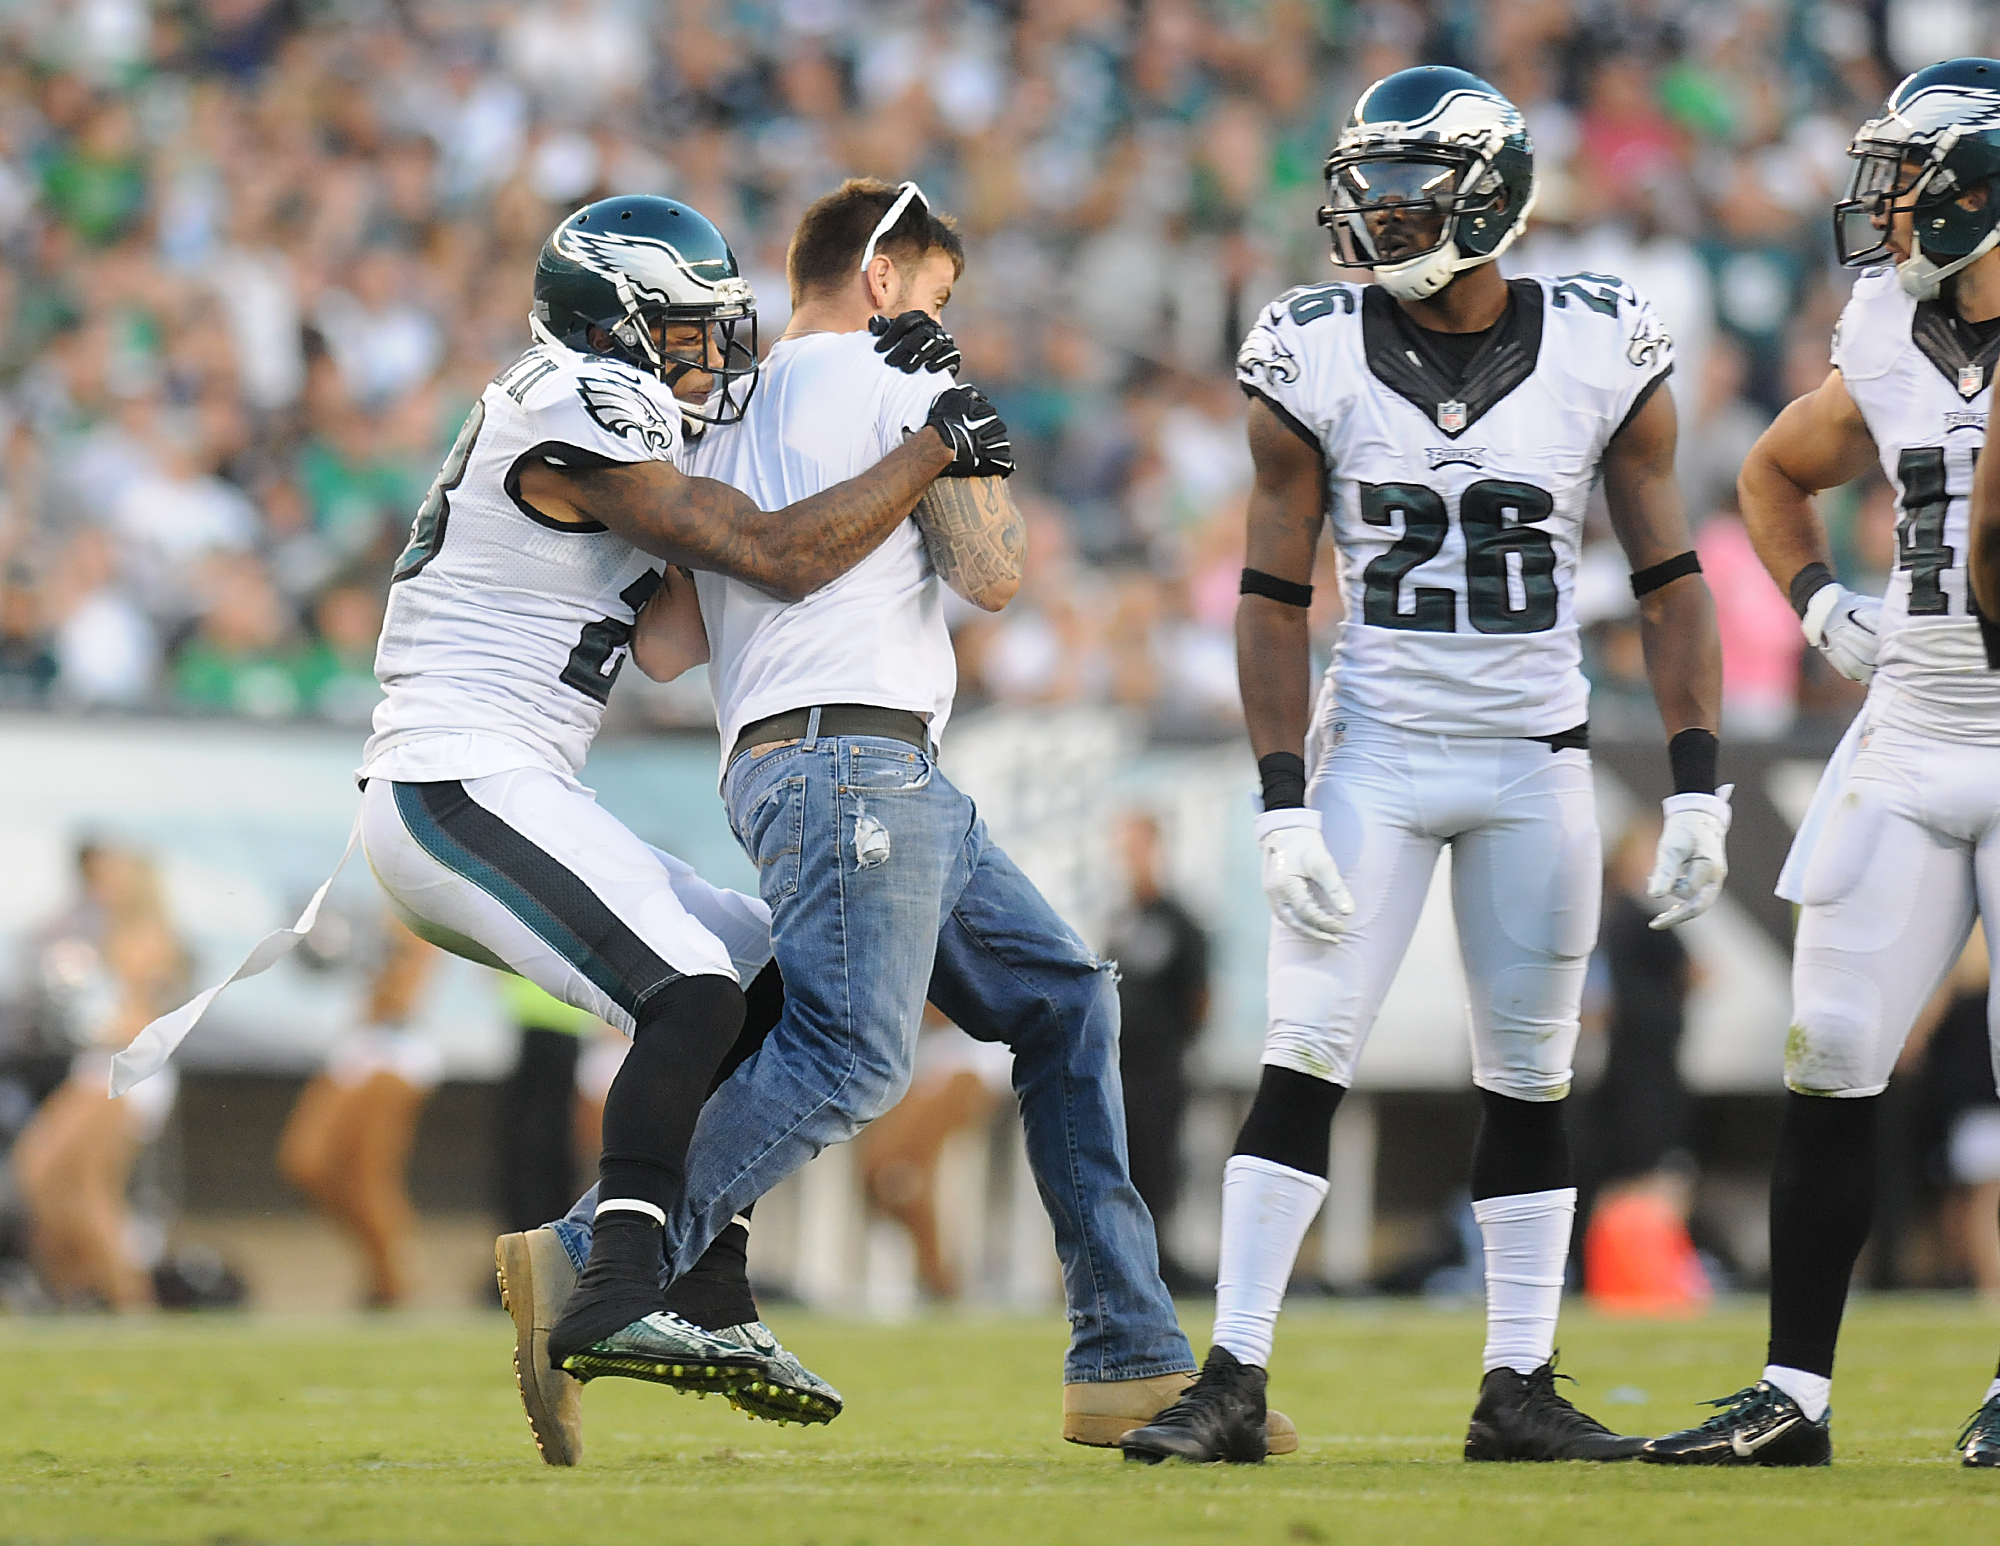  Eagles cornback Nolan Carroll (23) tackles a fan who rushed the field during their game against the Cowboys at Lincoln Financial Field. 